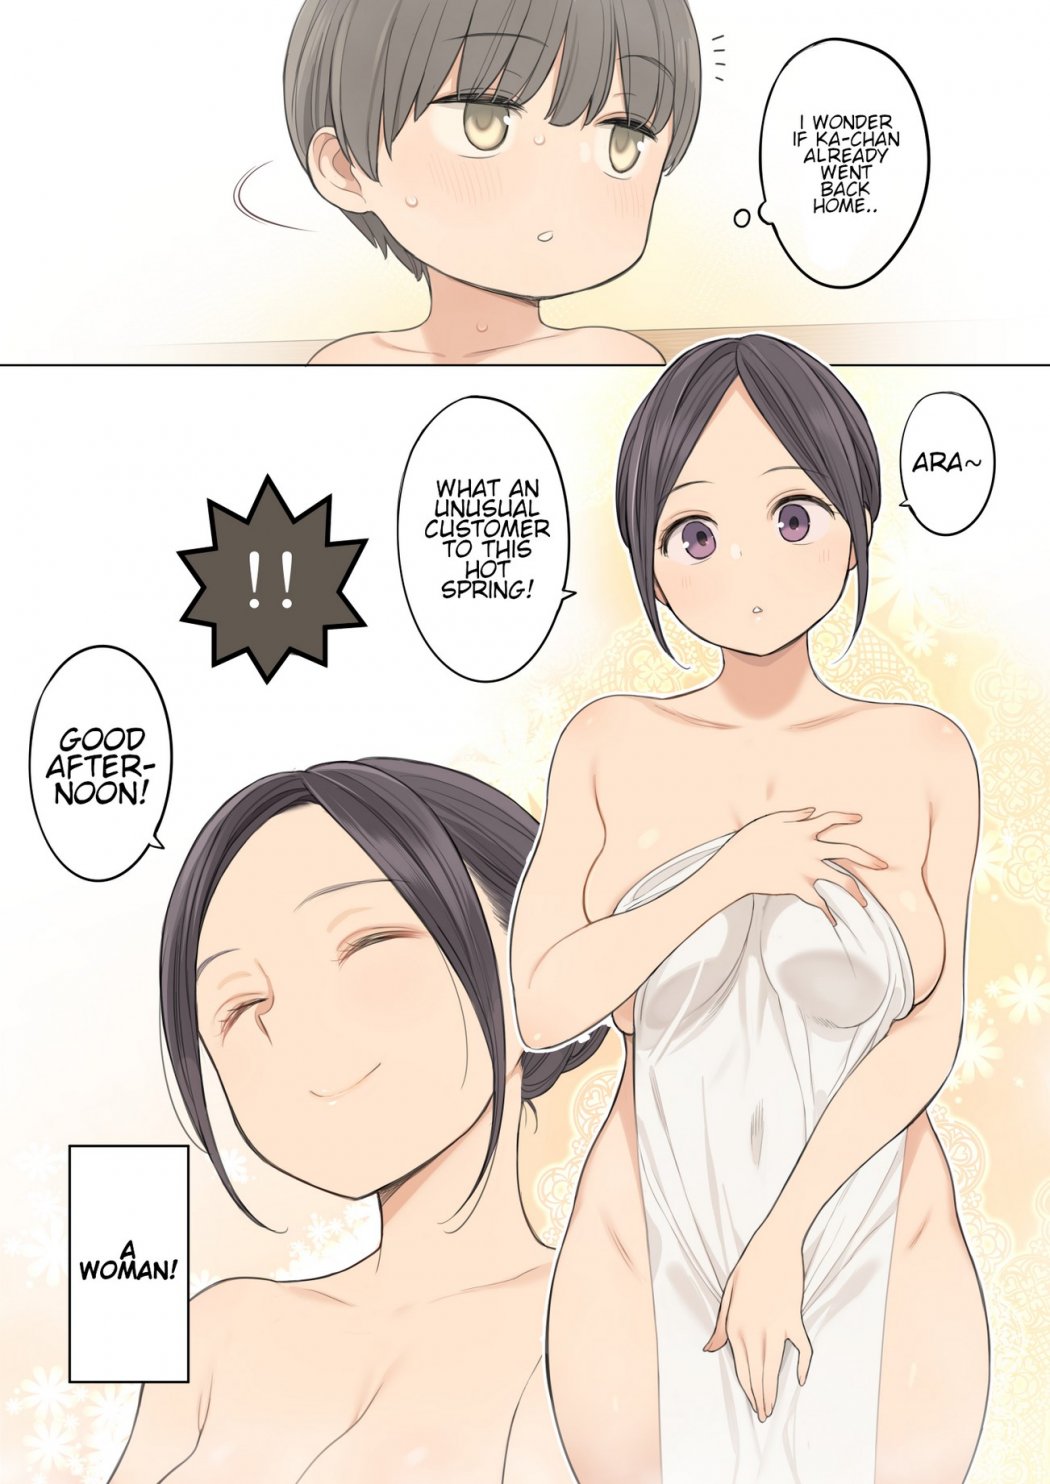 Story of how I came a lot with an older oneesan at the mixed hot spring bath